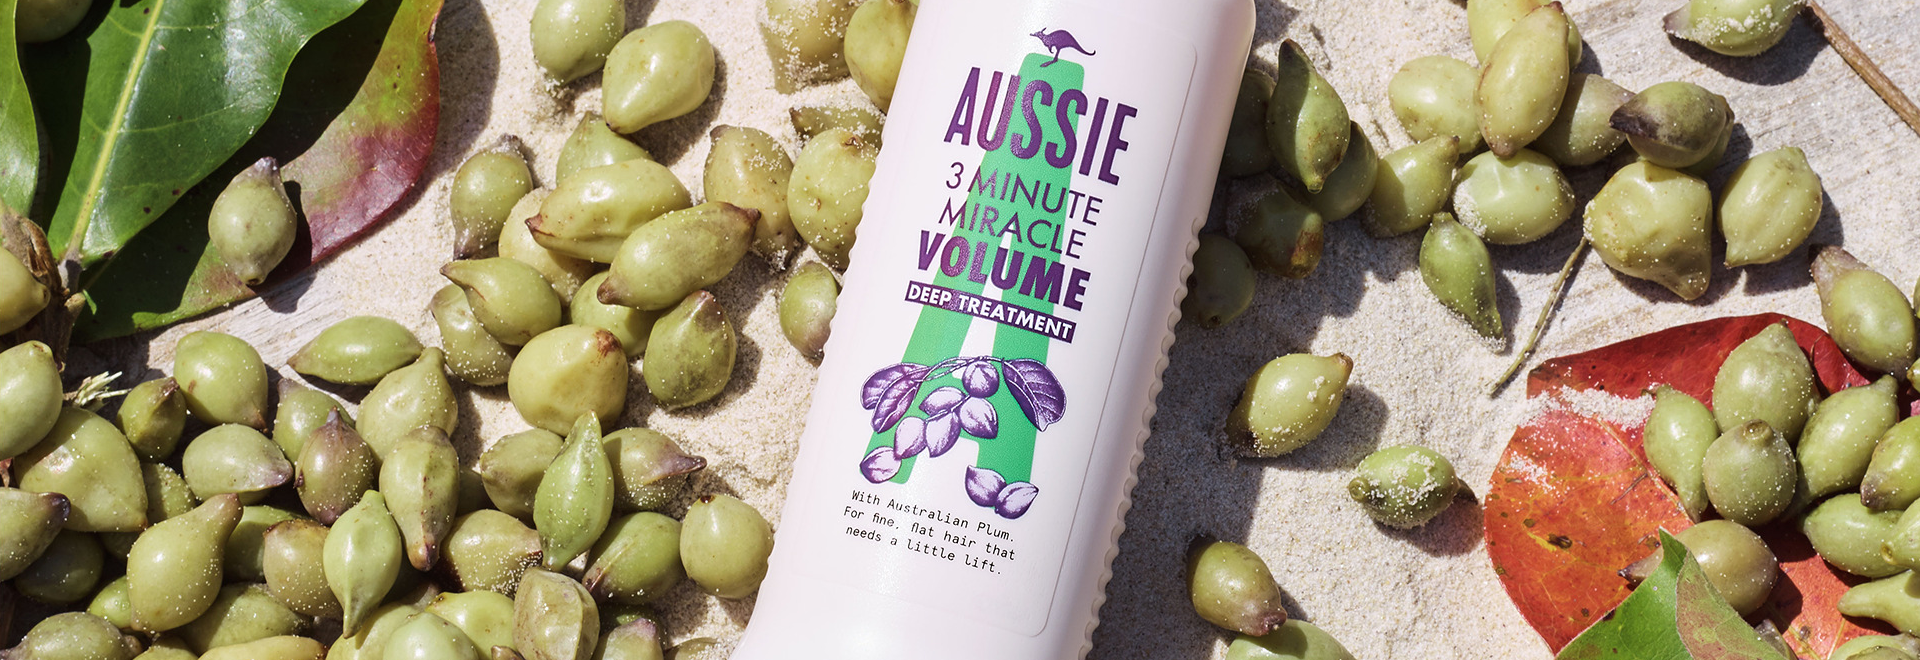 An Aussie Conditioner bottle surrounded by kakadu plums on the sand 